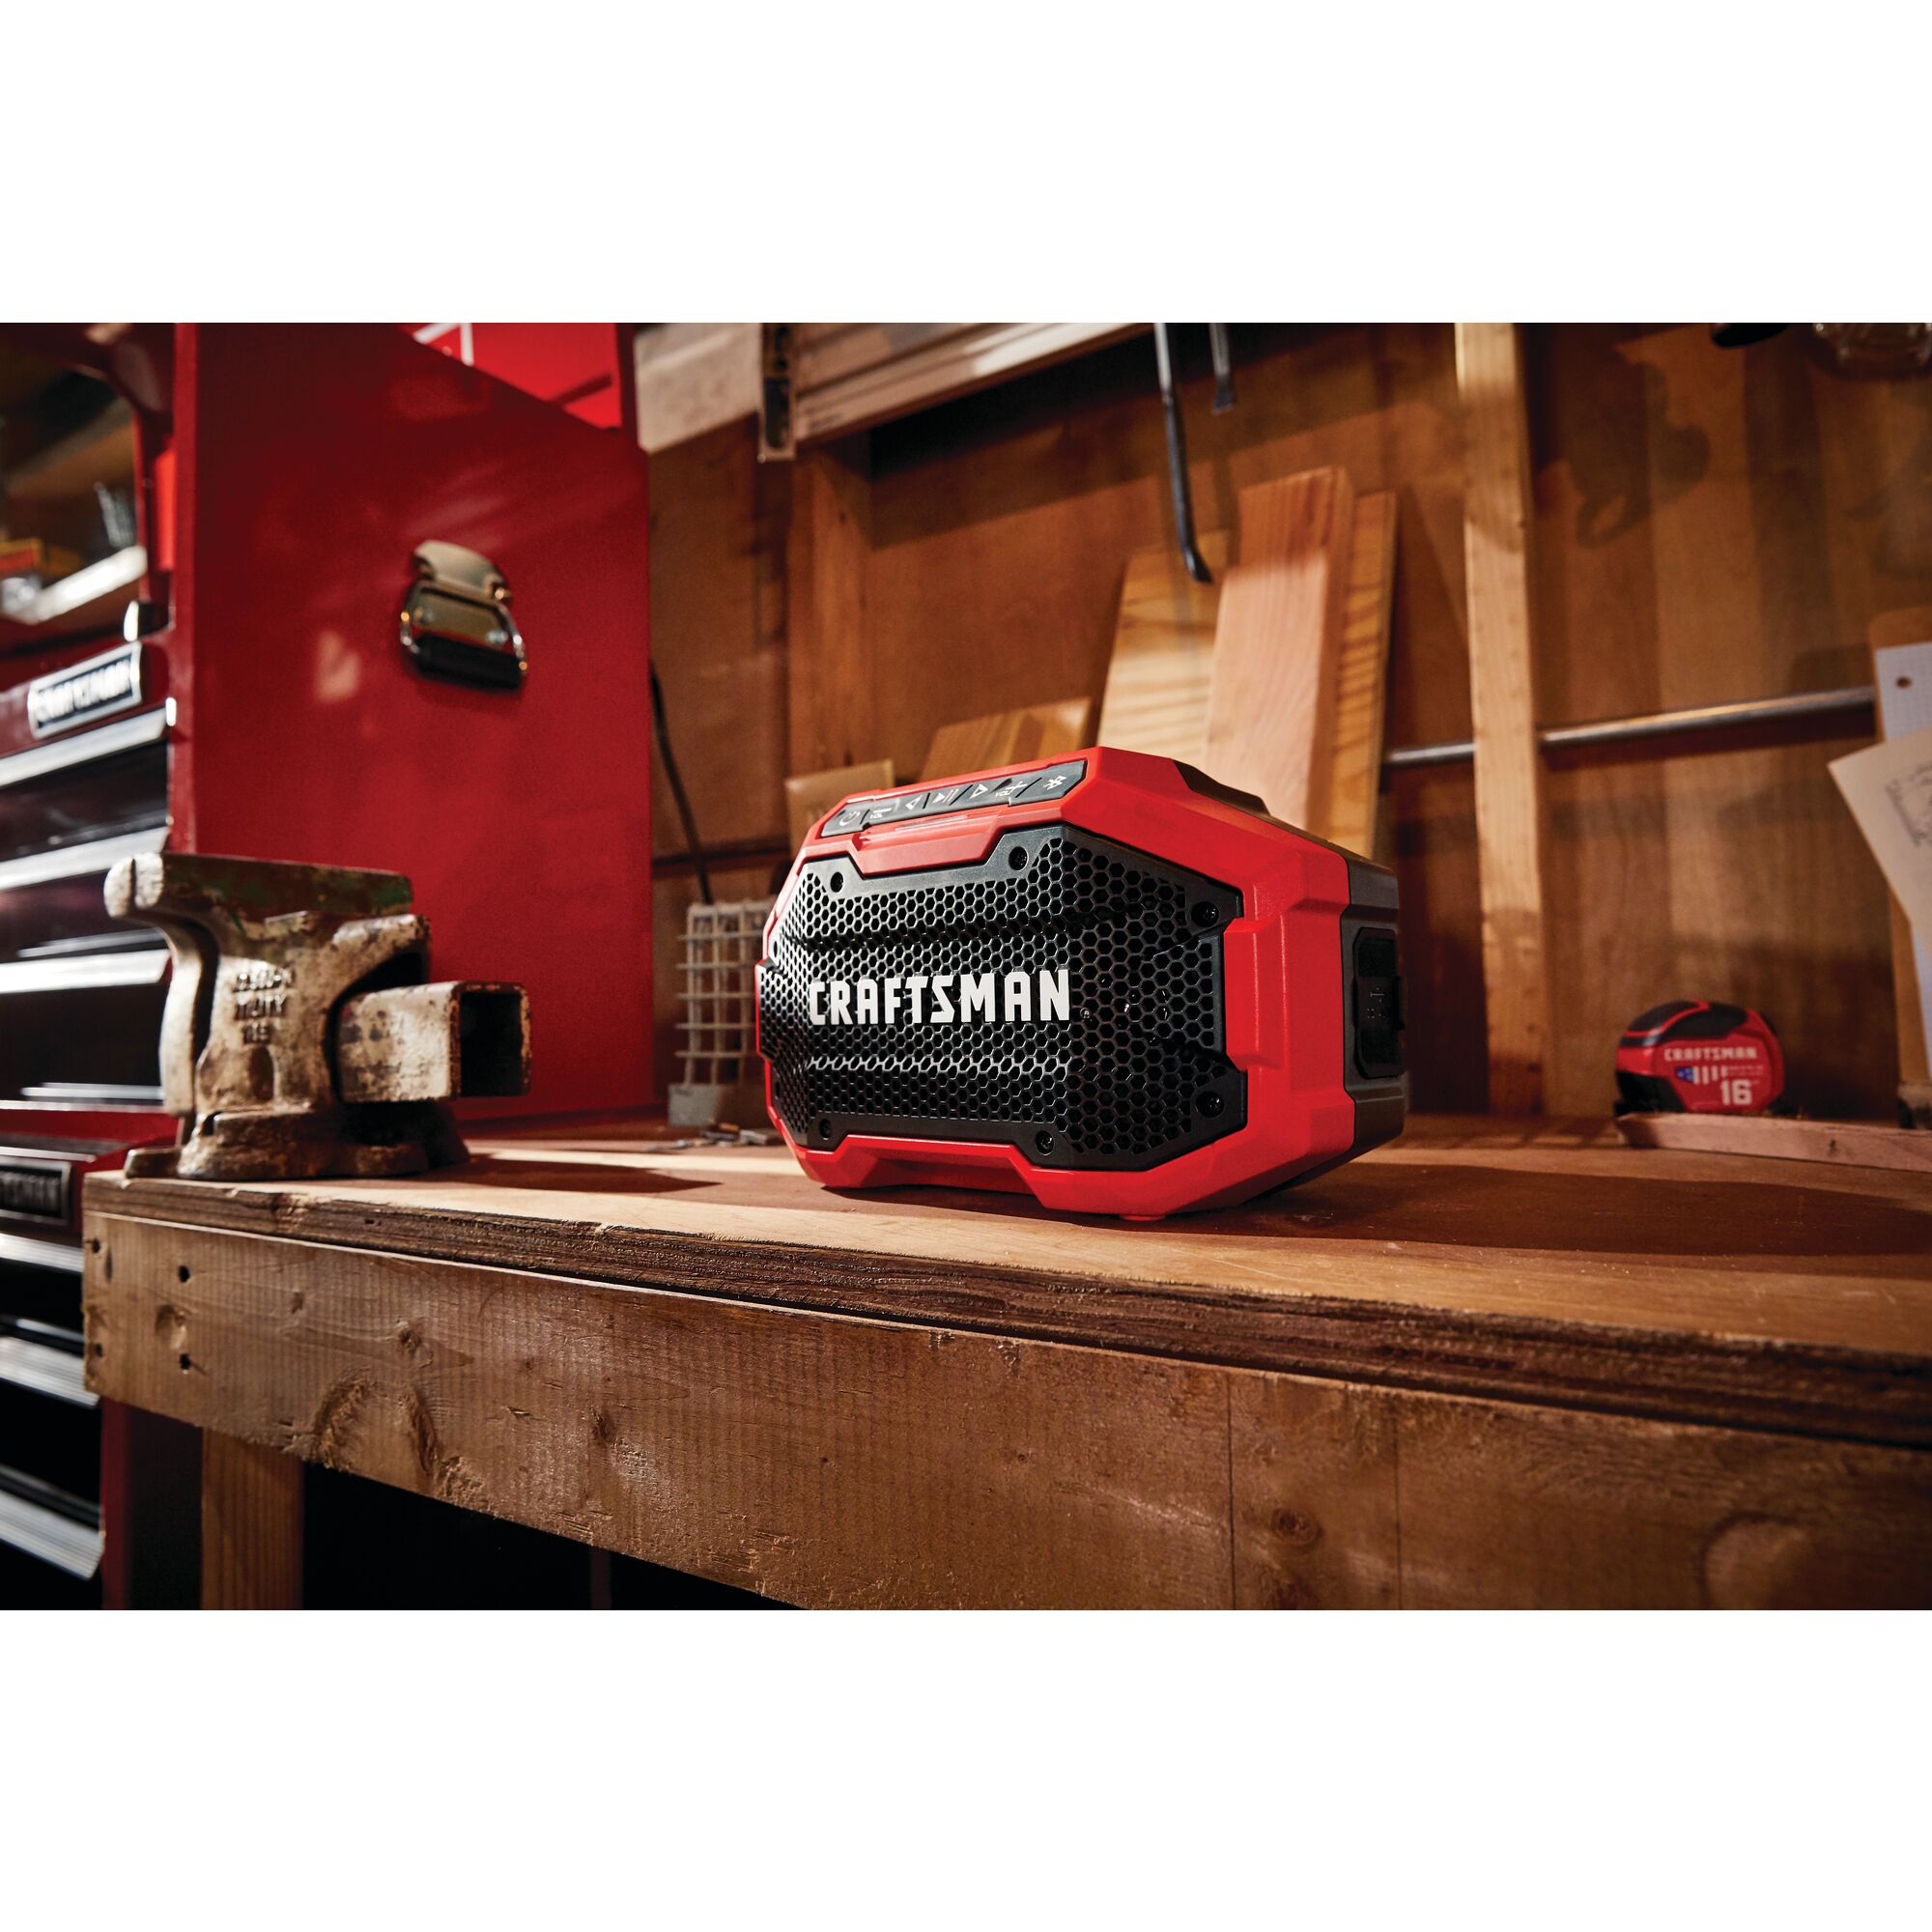 20 volt cordless bluetooth speaker placed on a wooden work station in a work shop.